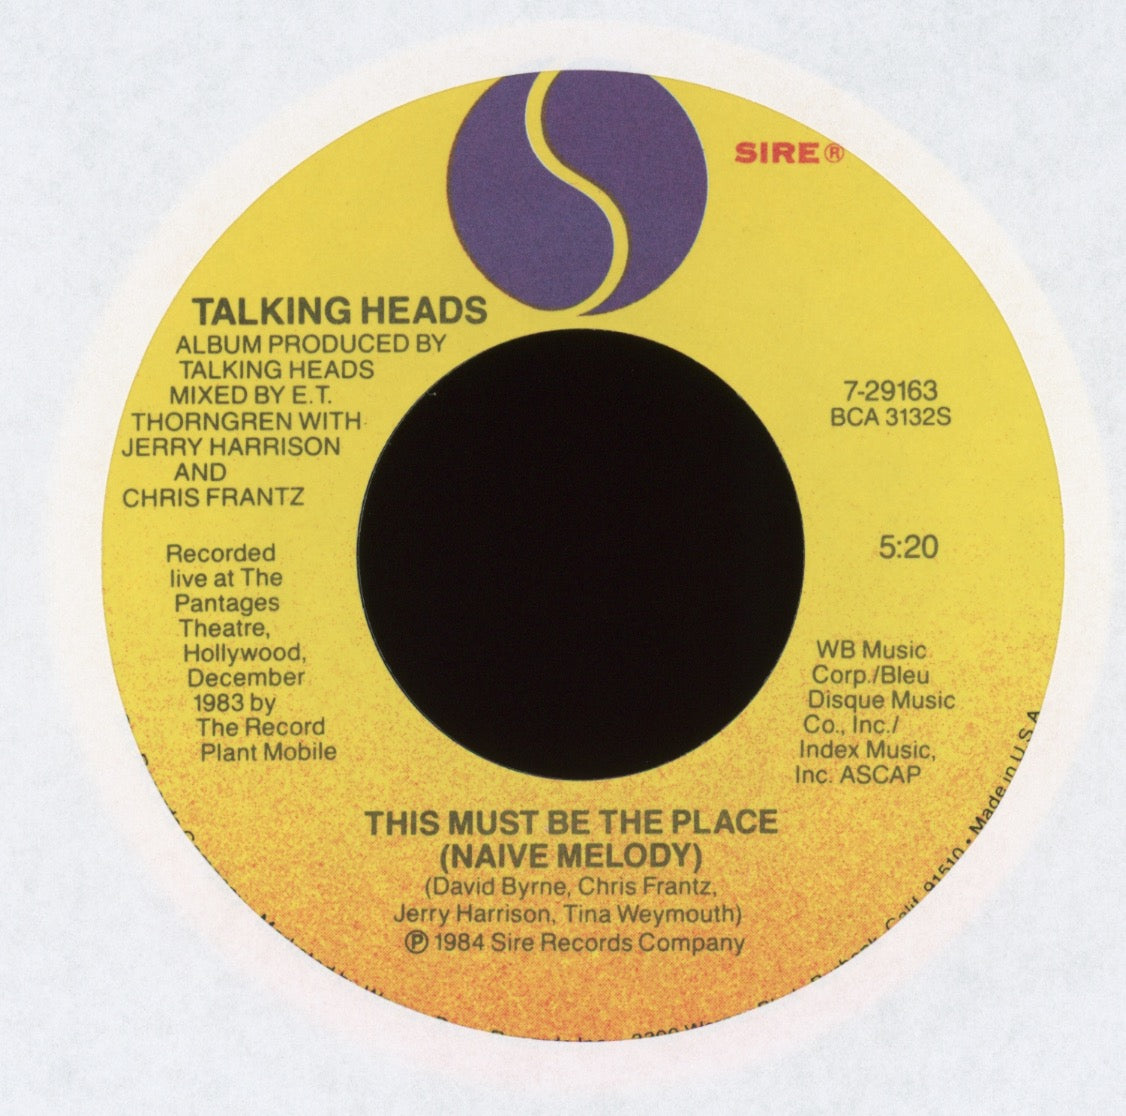 Talking Heads - Once In A Lifetime on Sire With Picture Sleeve